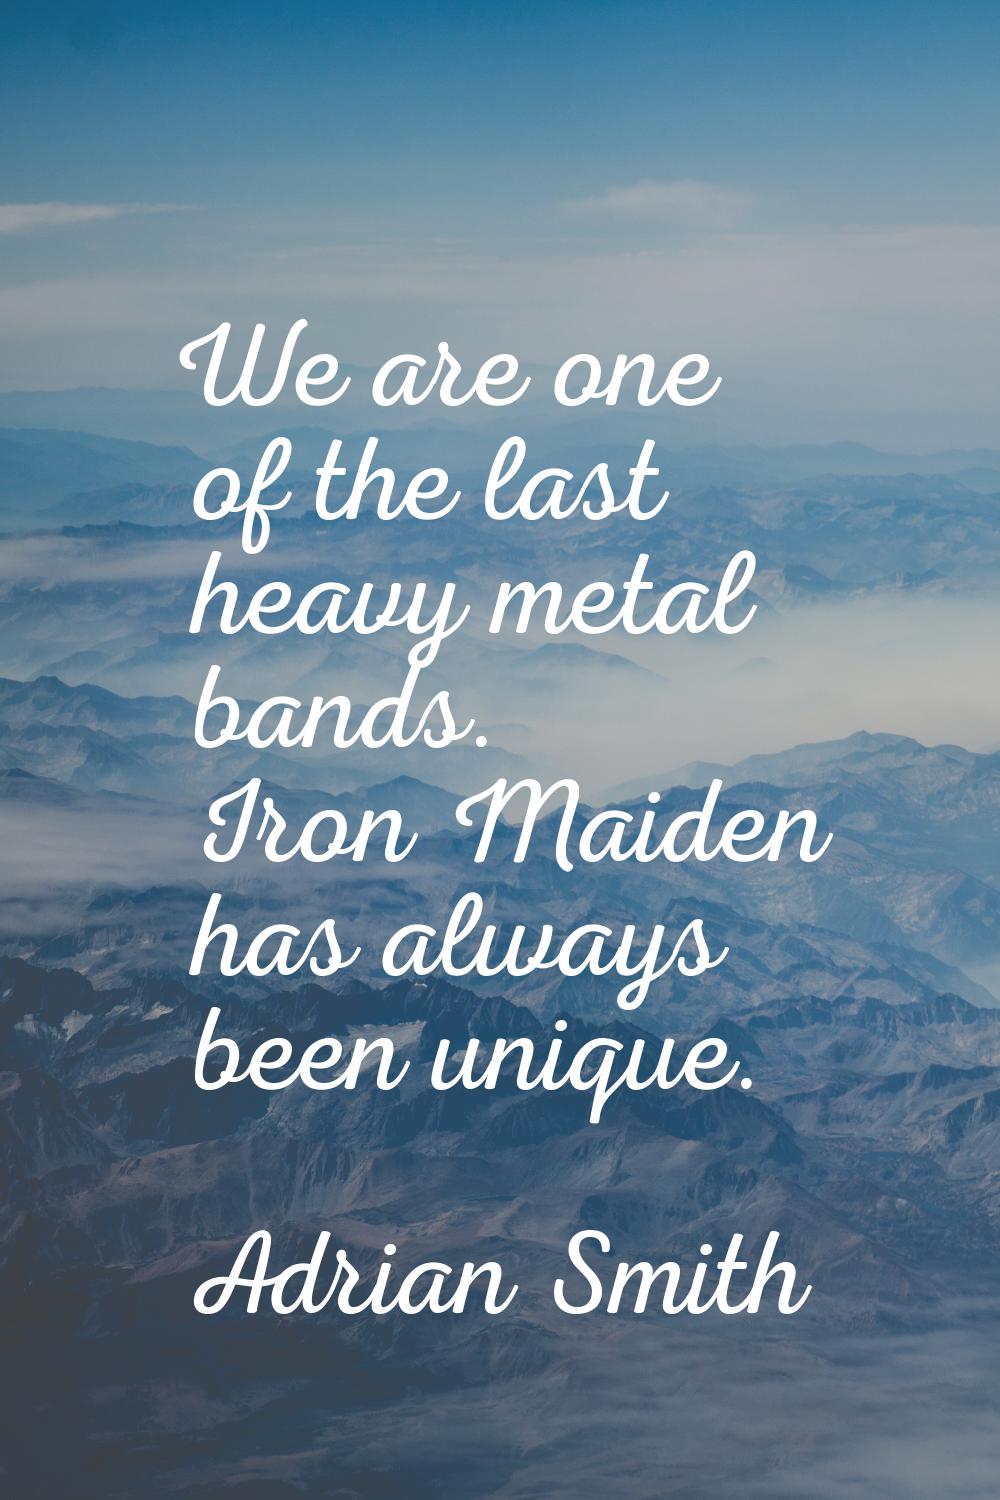 We are one of the last heavy metal bands. Iron Maiden has always been unique.